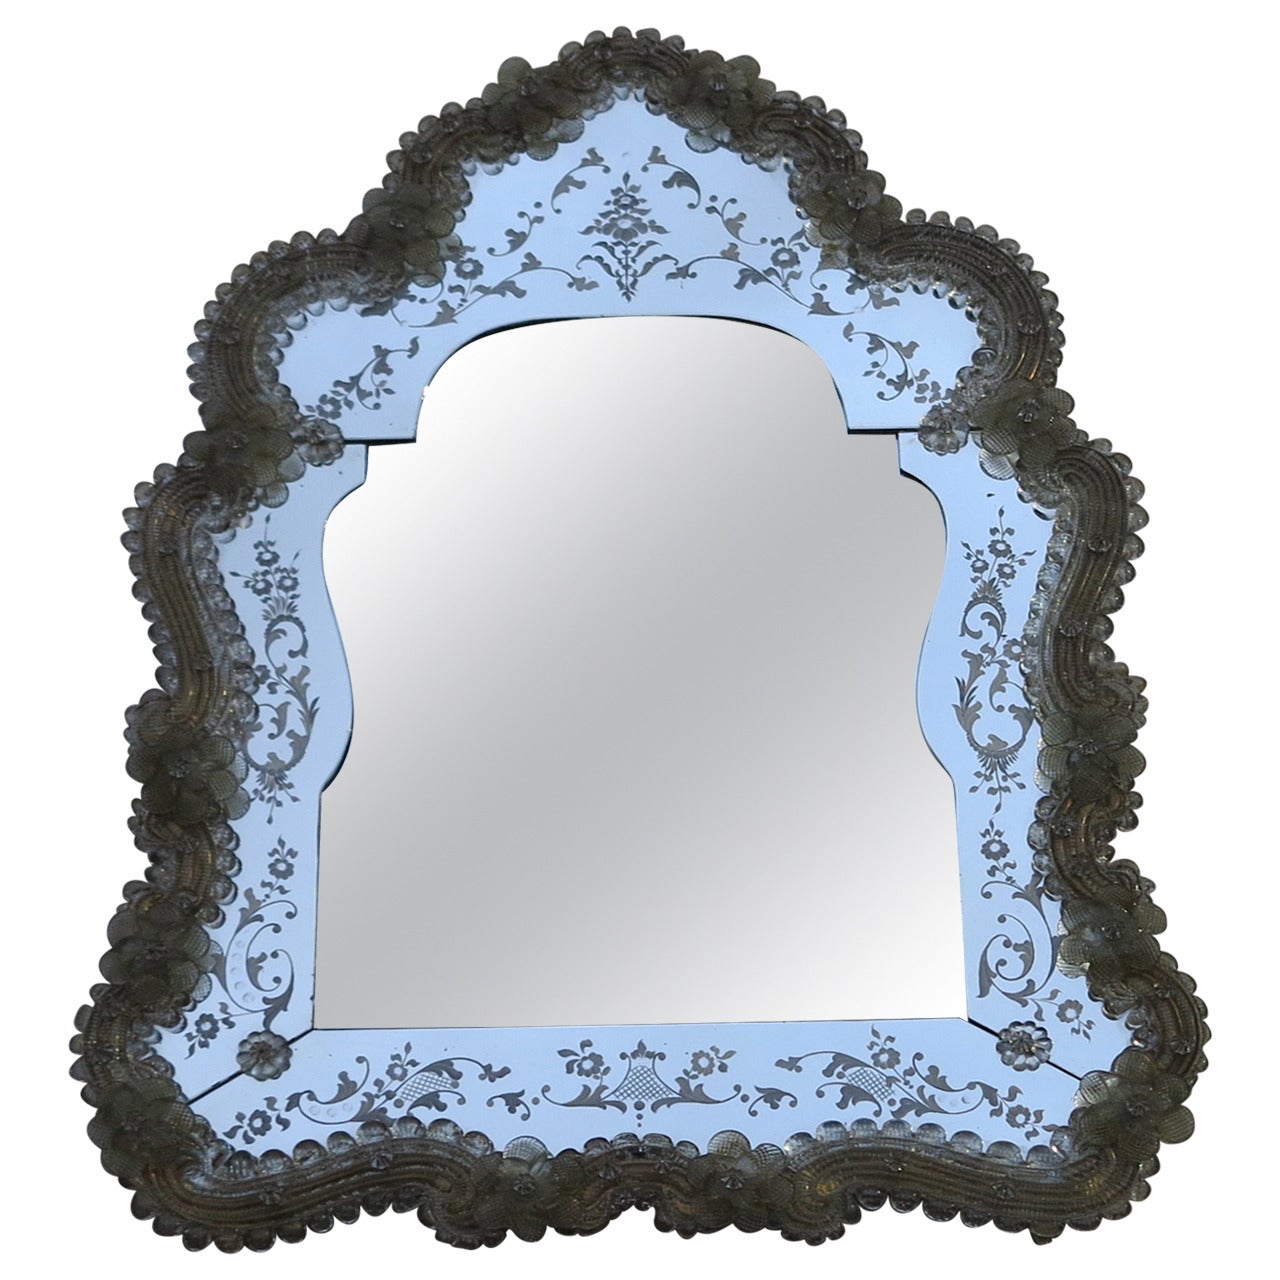 Veronese Crest Mirror with a Beveled Mirror in the Center For Sale